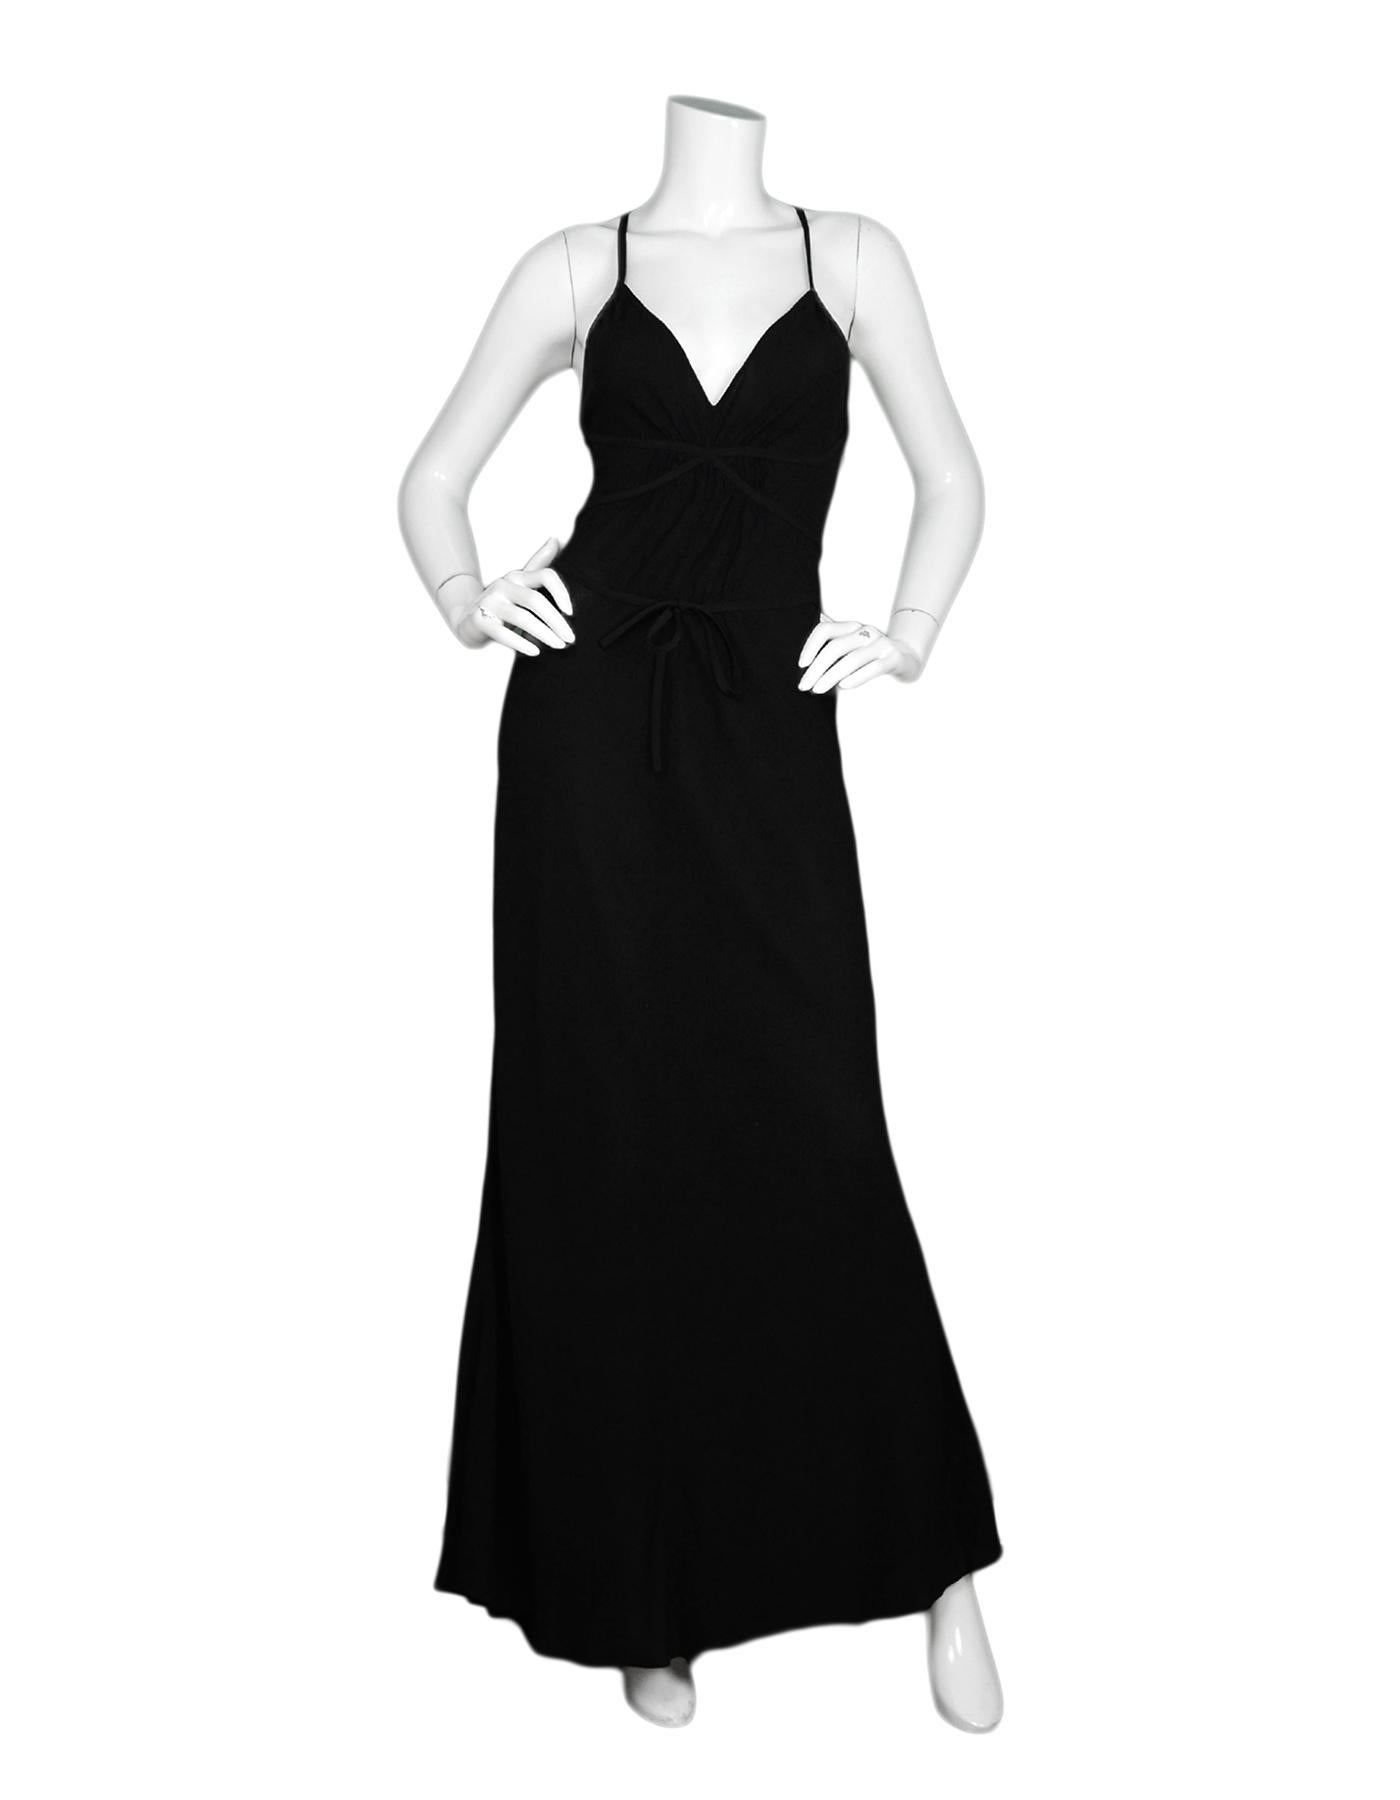 Moschino Black Silk Spaghetti Strap Gown Sz 8 NWT

Made In: Italy
Color: Black
Materials: 100% silk
Opening/Closure: Hidden side zipper with hook eye at top
Overall Condition: Excellent condition with original tags attached 
Estimated Retail: $1,190